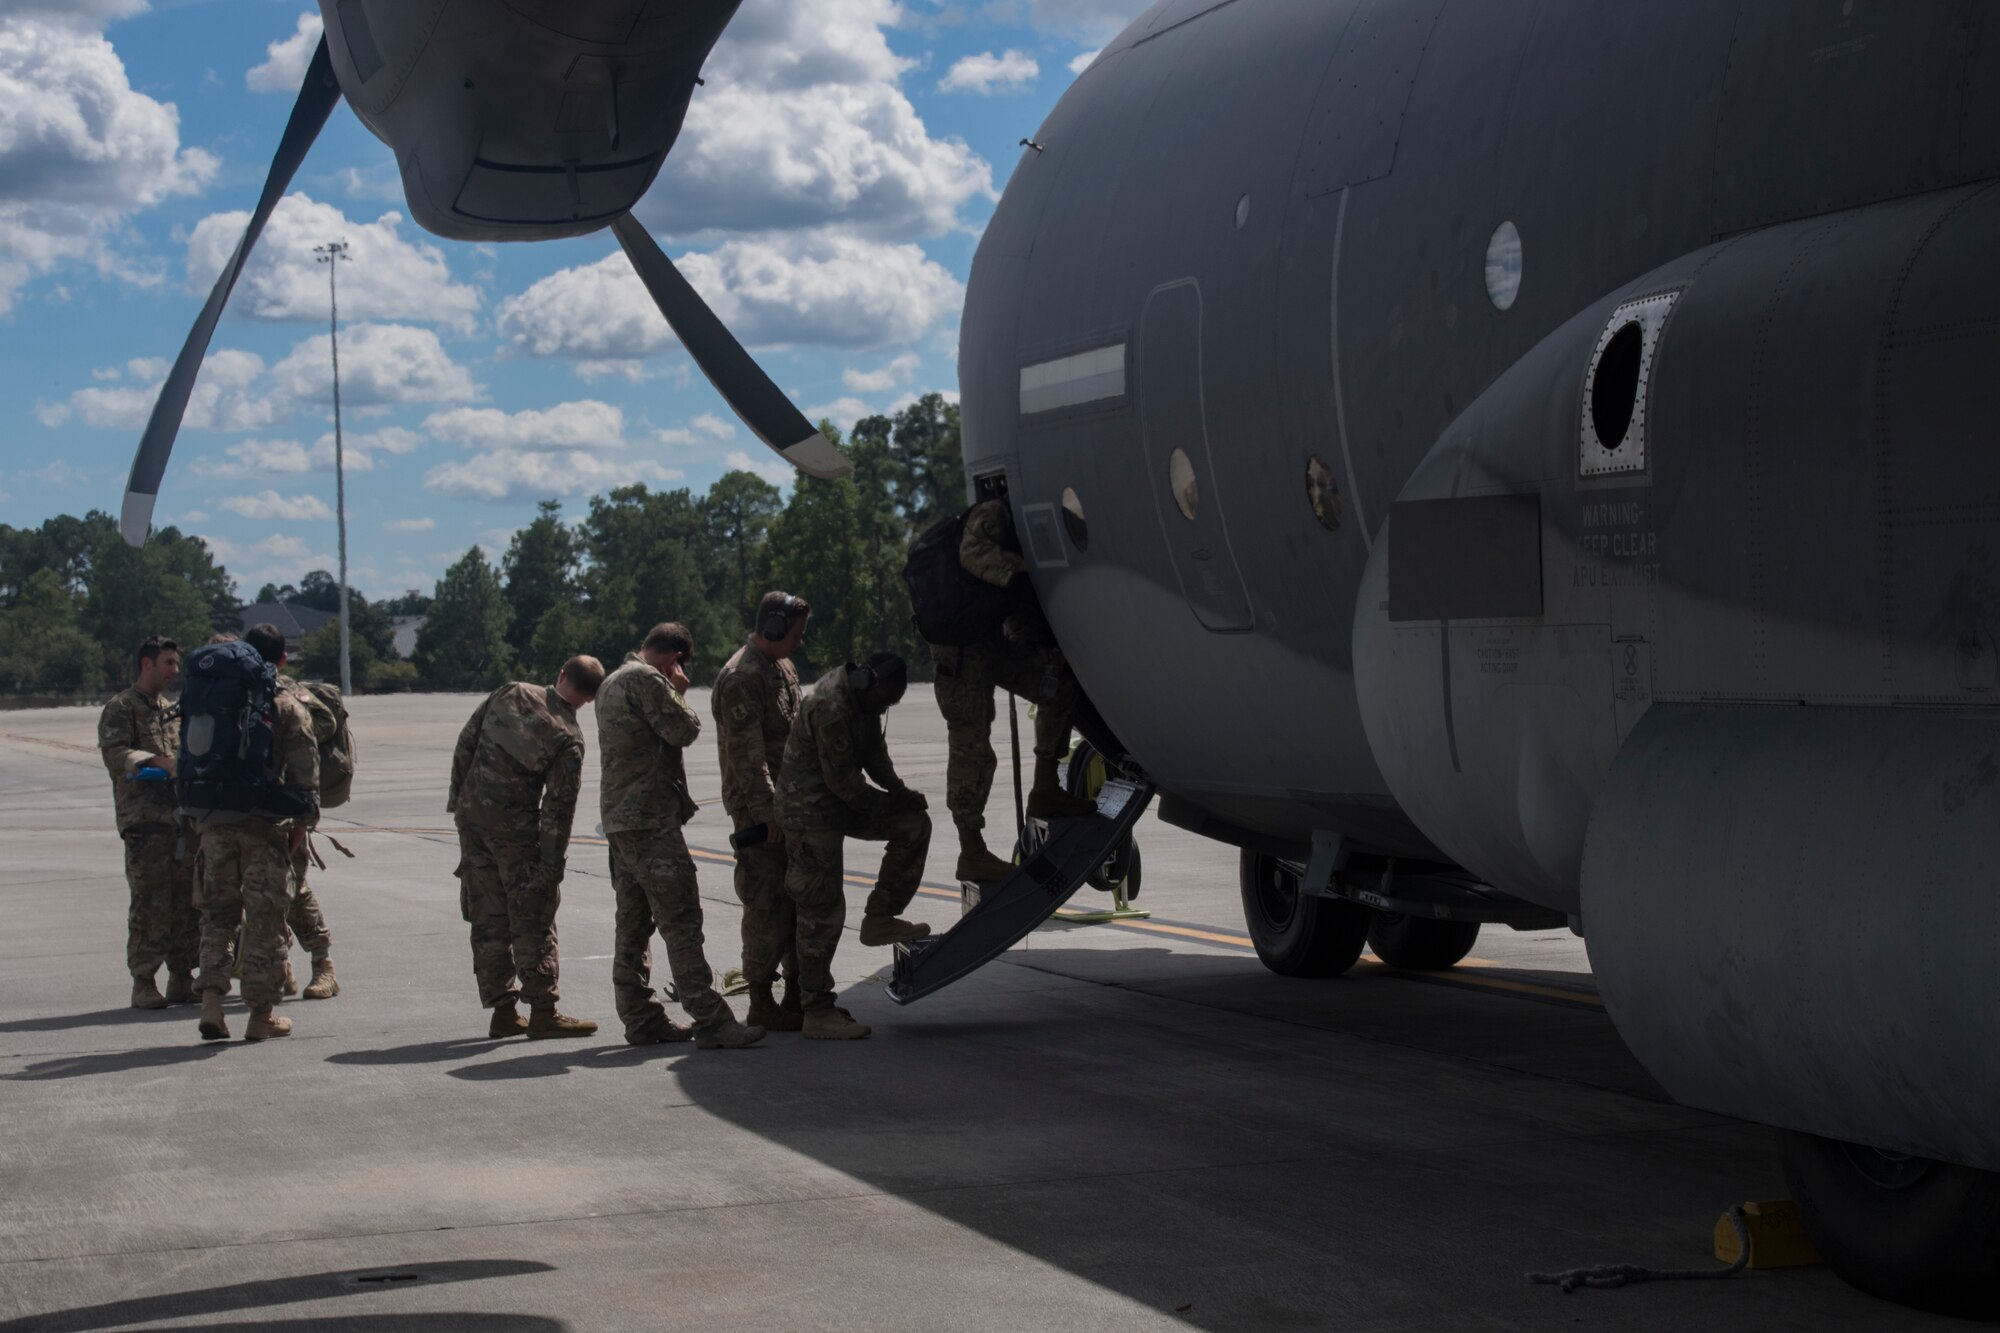 Airmen from the 71st Rescue Squadron board a HC-130J Combat King II, Sept. 15, 2018, at Moody Air Force Base, Ga. The 334th Air Expeditionary Group launched HC-130J Combat King IIs, HH-60G Pavehawks, aircrew and support personnel to pre-position at Joint Base Charleston, S.C., for potential Tropical Storm Florence response. Under the command of Col. John Creel, the 374th Rescue Group commander, the AEG integrated to make one expeditionary search and rescue unit comprised of rescue and support personnel from both the 23d Wing, 920th Rescue Wing at Patrick Air Force Base, Fla., and 51st Communications Squadron at Warner Robins Air Force Base, Ga.  (U.S. Air Force photo by Staff Sgt. Eric Summers Jr.)